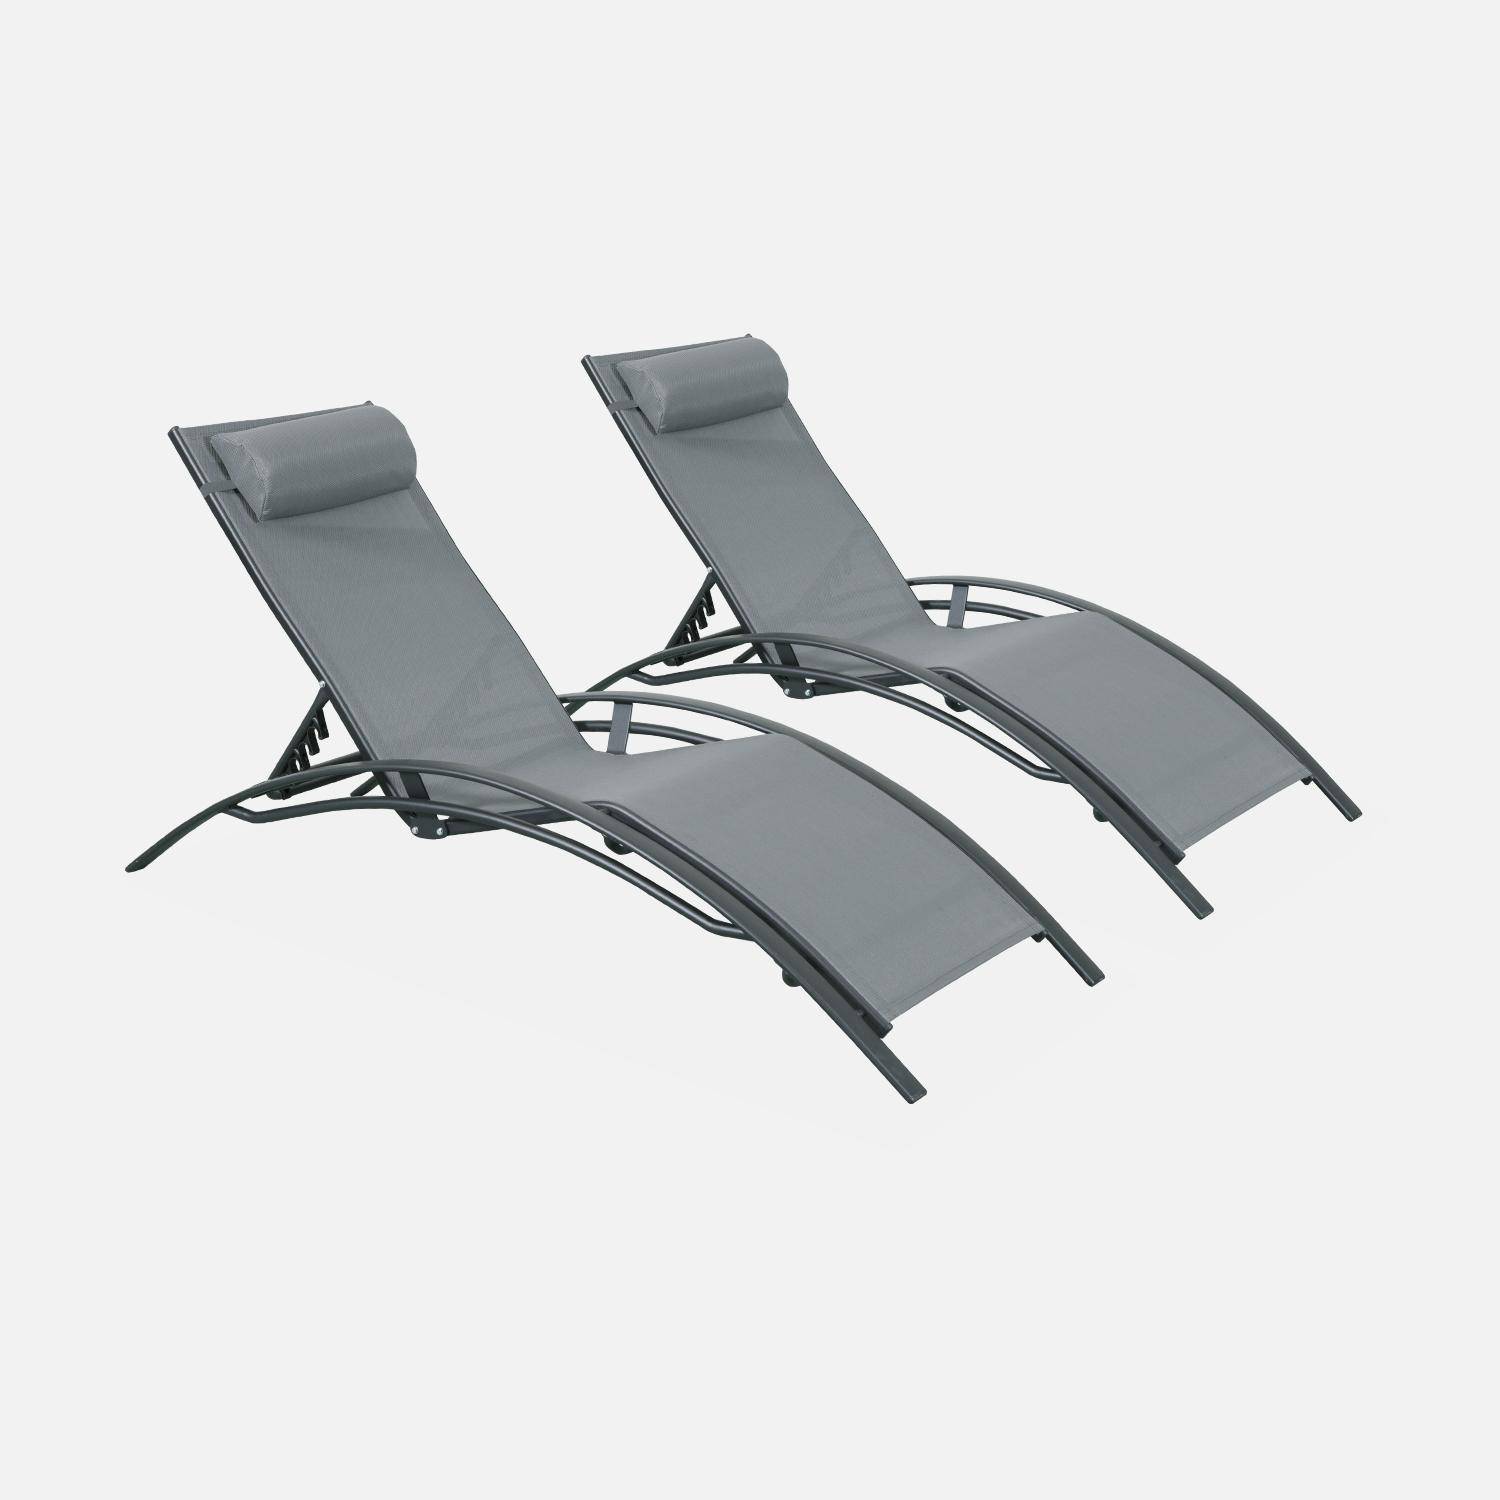 Pair of aluminium and textilene sun loungers, 4 reclining positions, headrest included, stackable - Louisa - Anthracite frame, Grey textilene,sweeek,Photo3